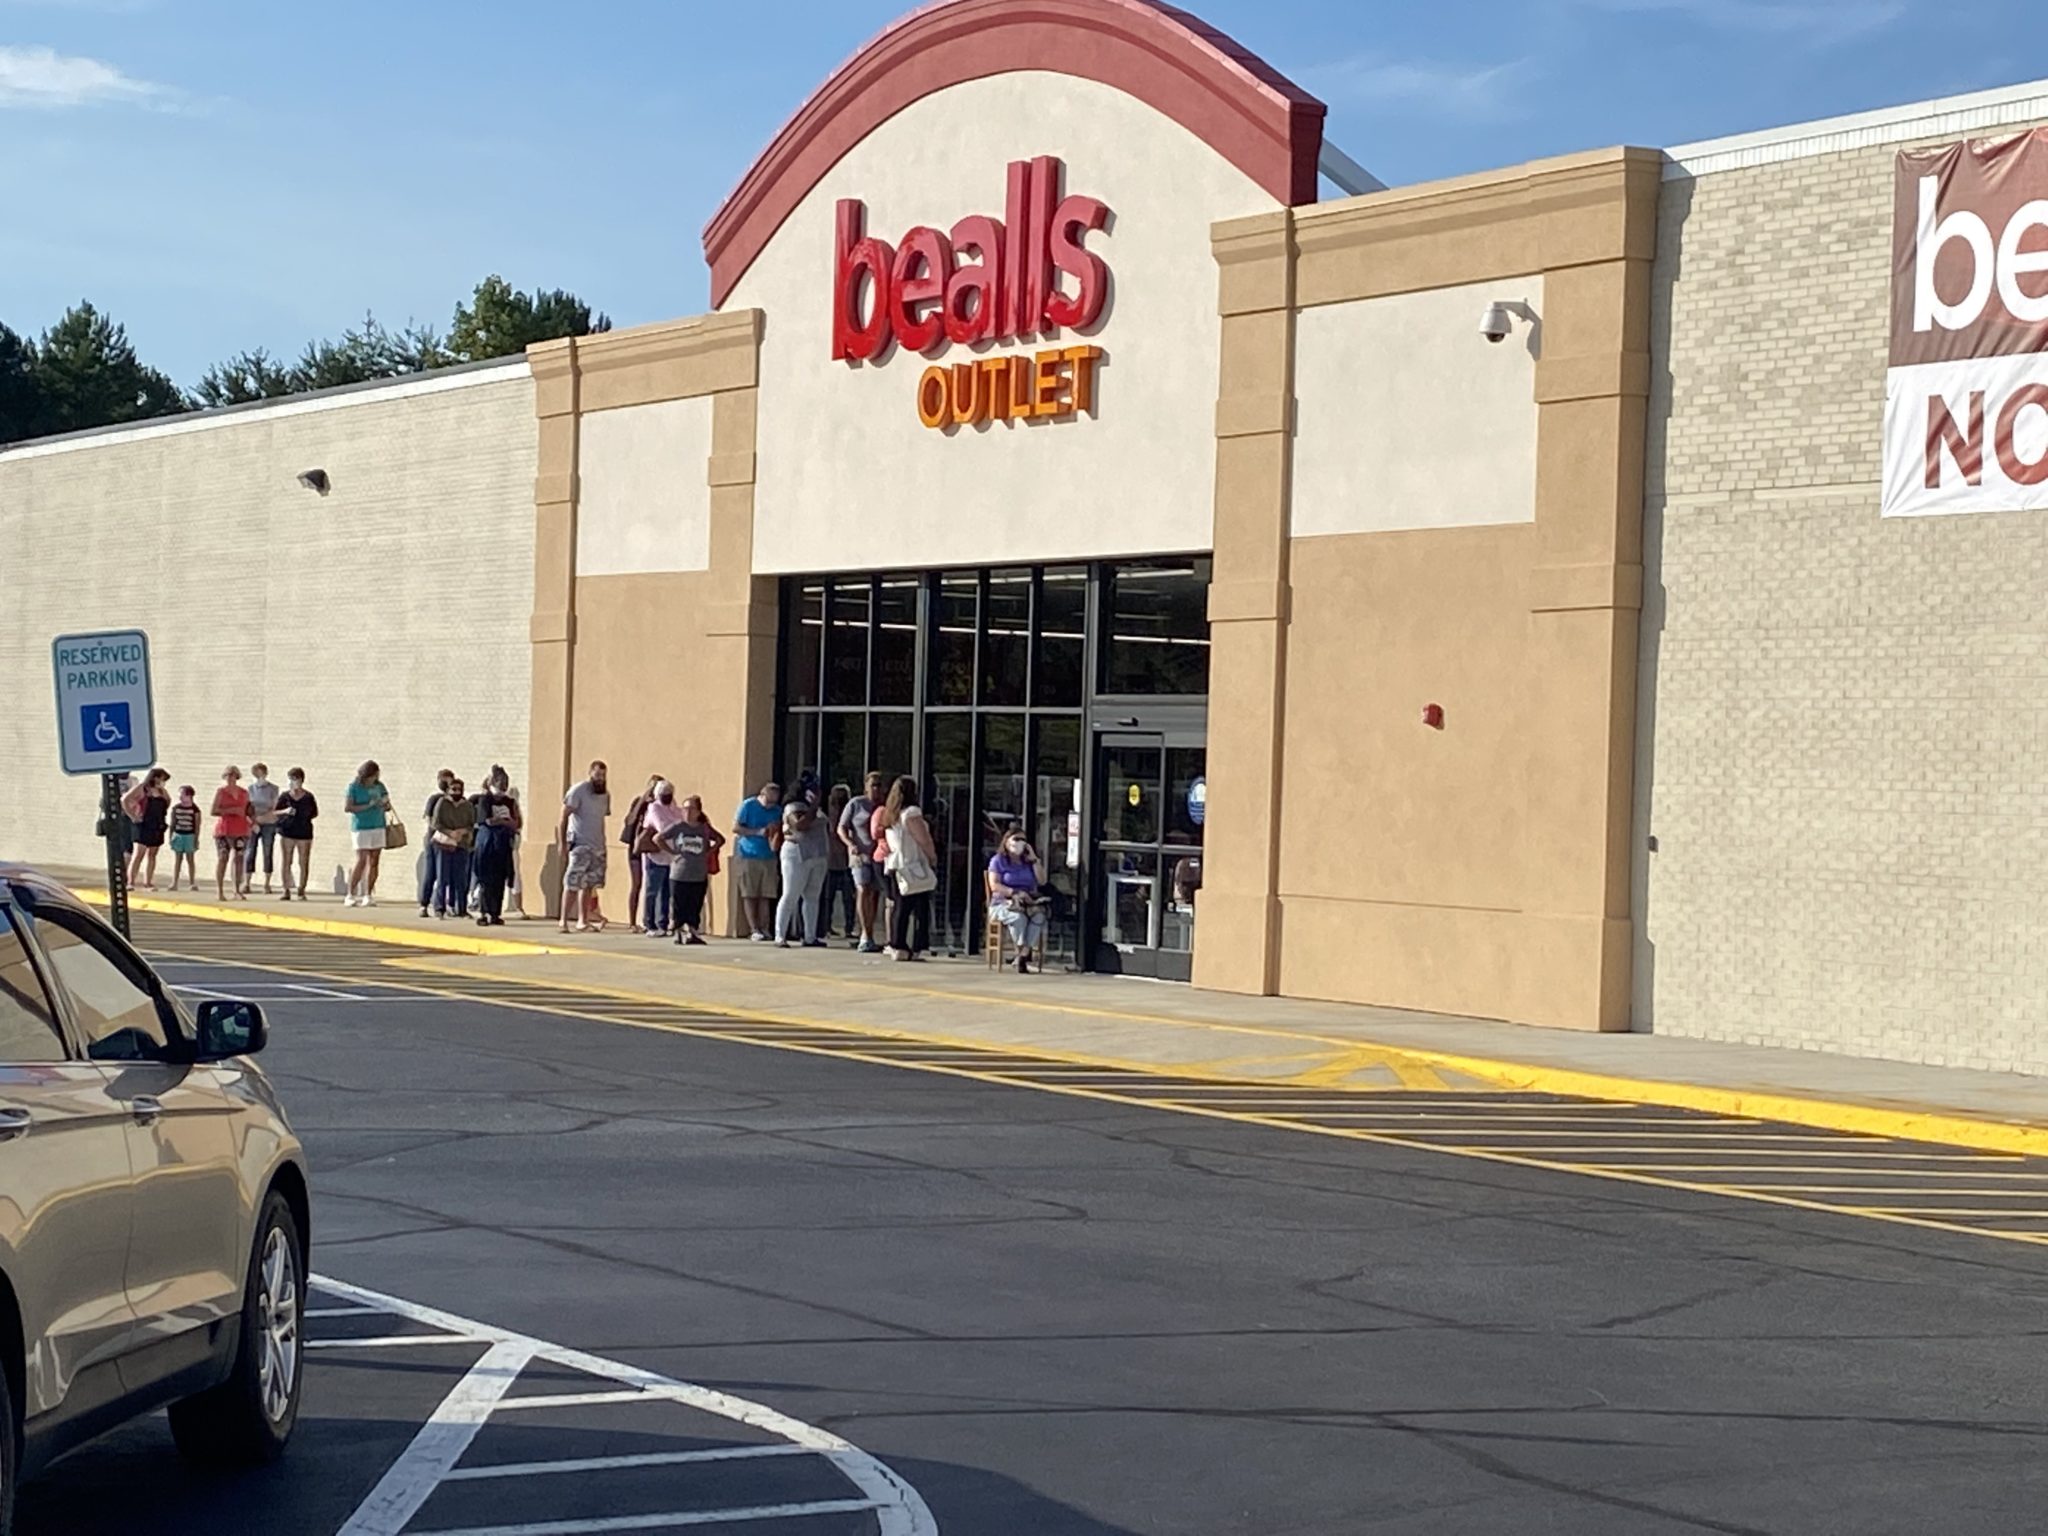 Bealls Outlet official opening and ribbon cutting ceremony in Habersham